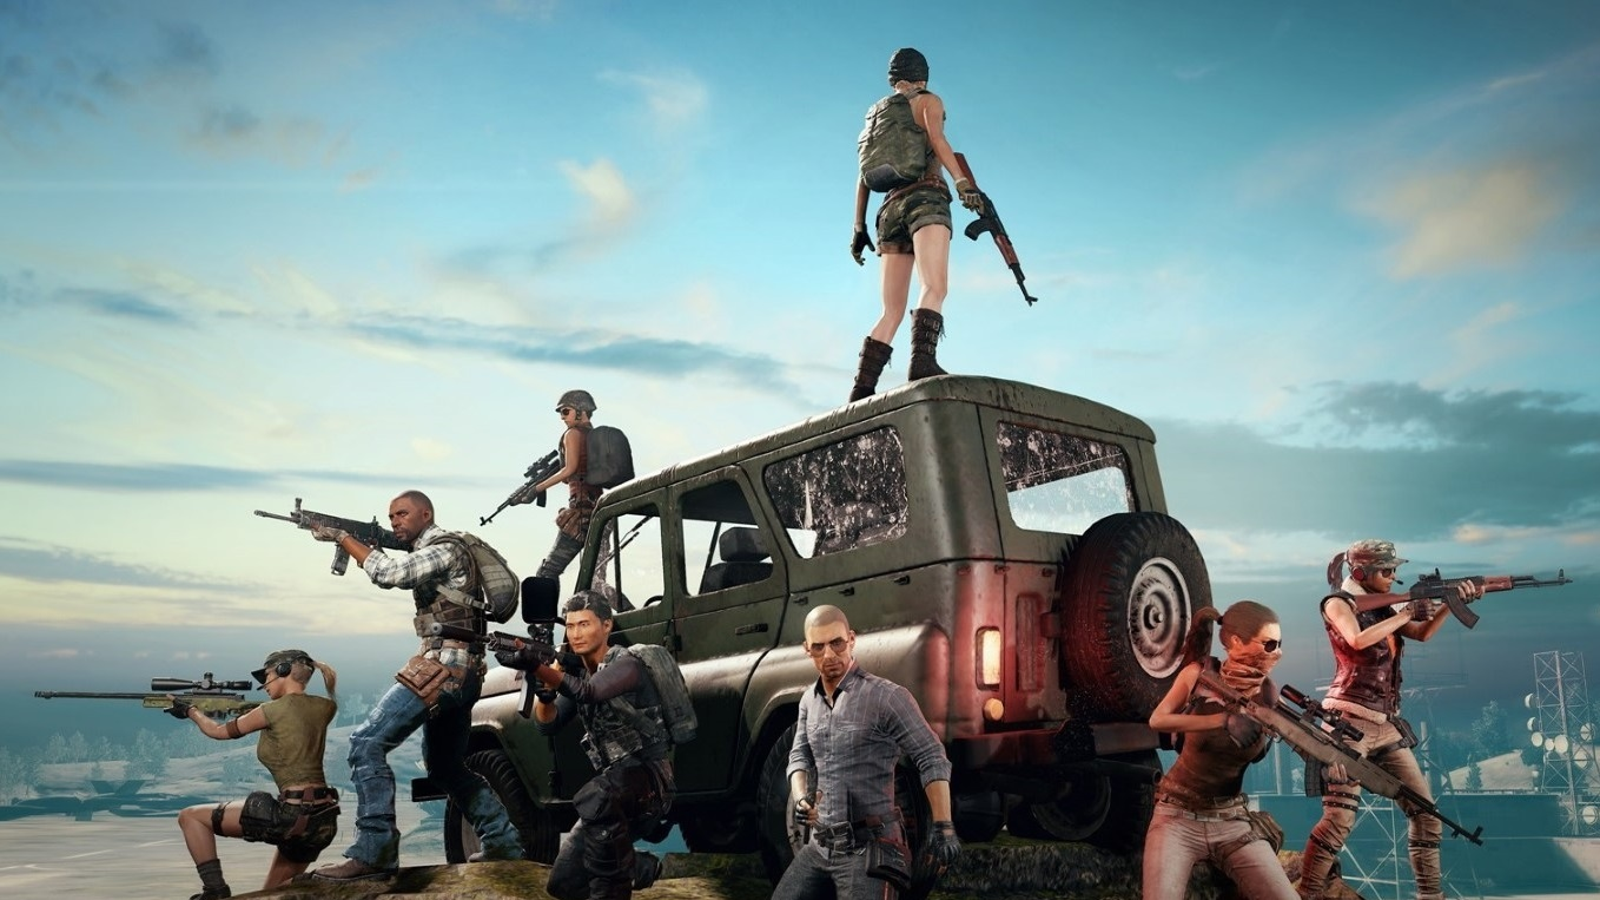 PUBG' Named Steam Awards Game of the Year 2018